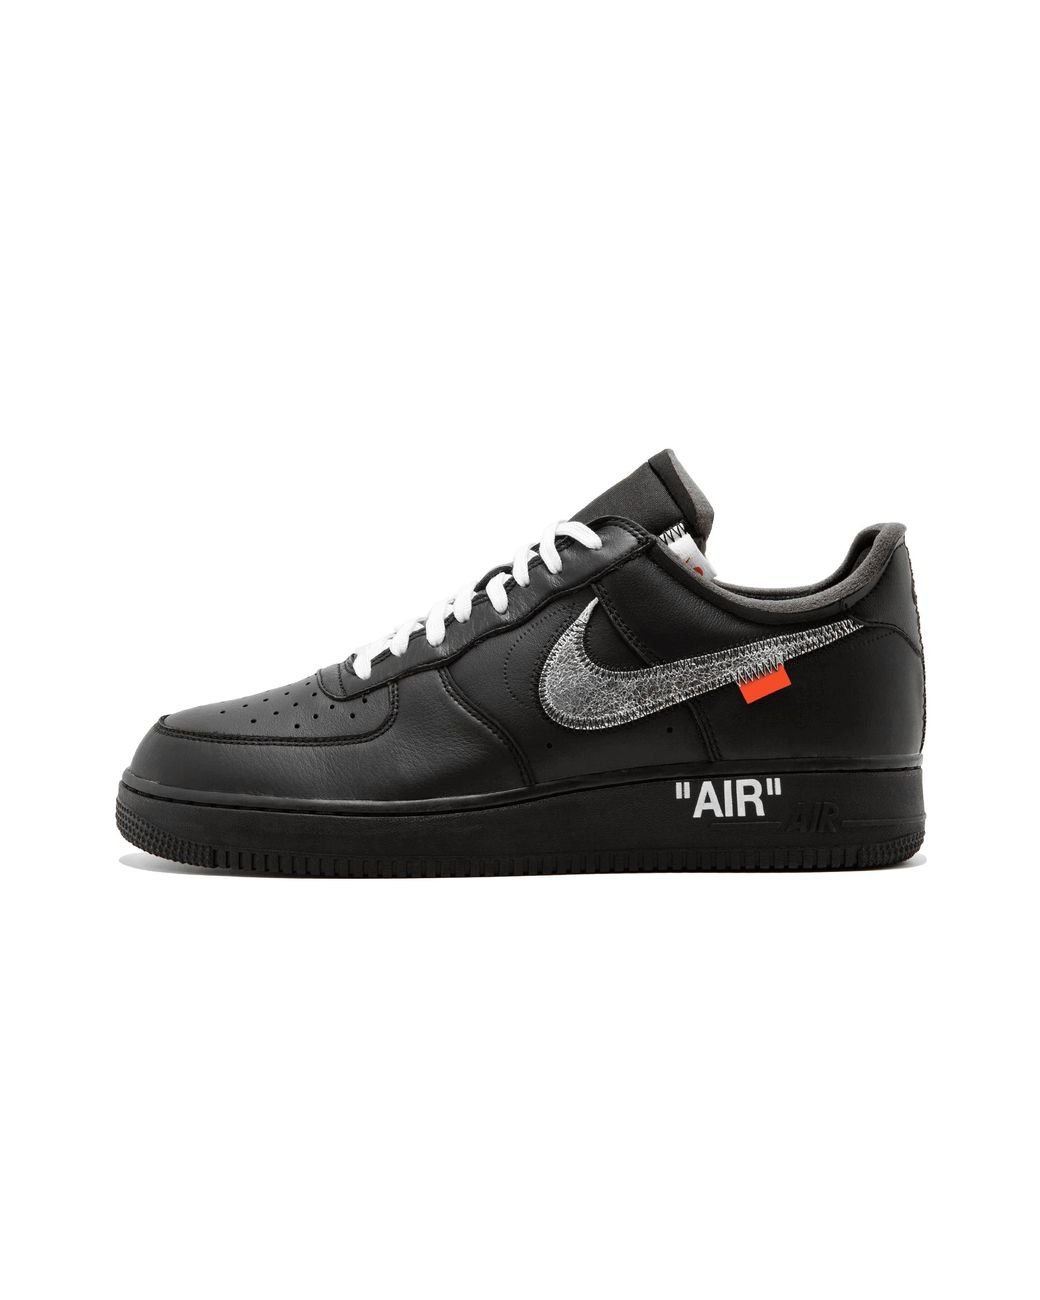 Nike Air Force 1 '07 Virgil x MoMa Off-White Size 10 Deadstock